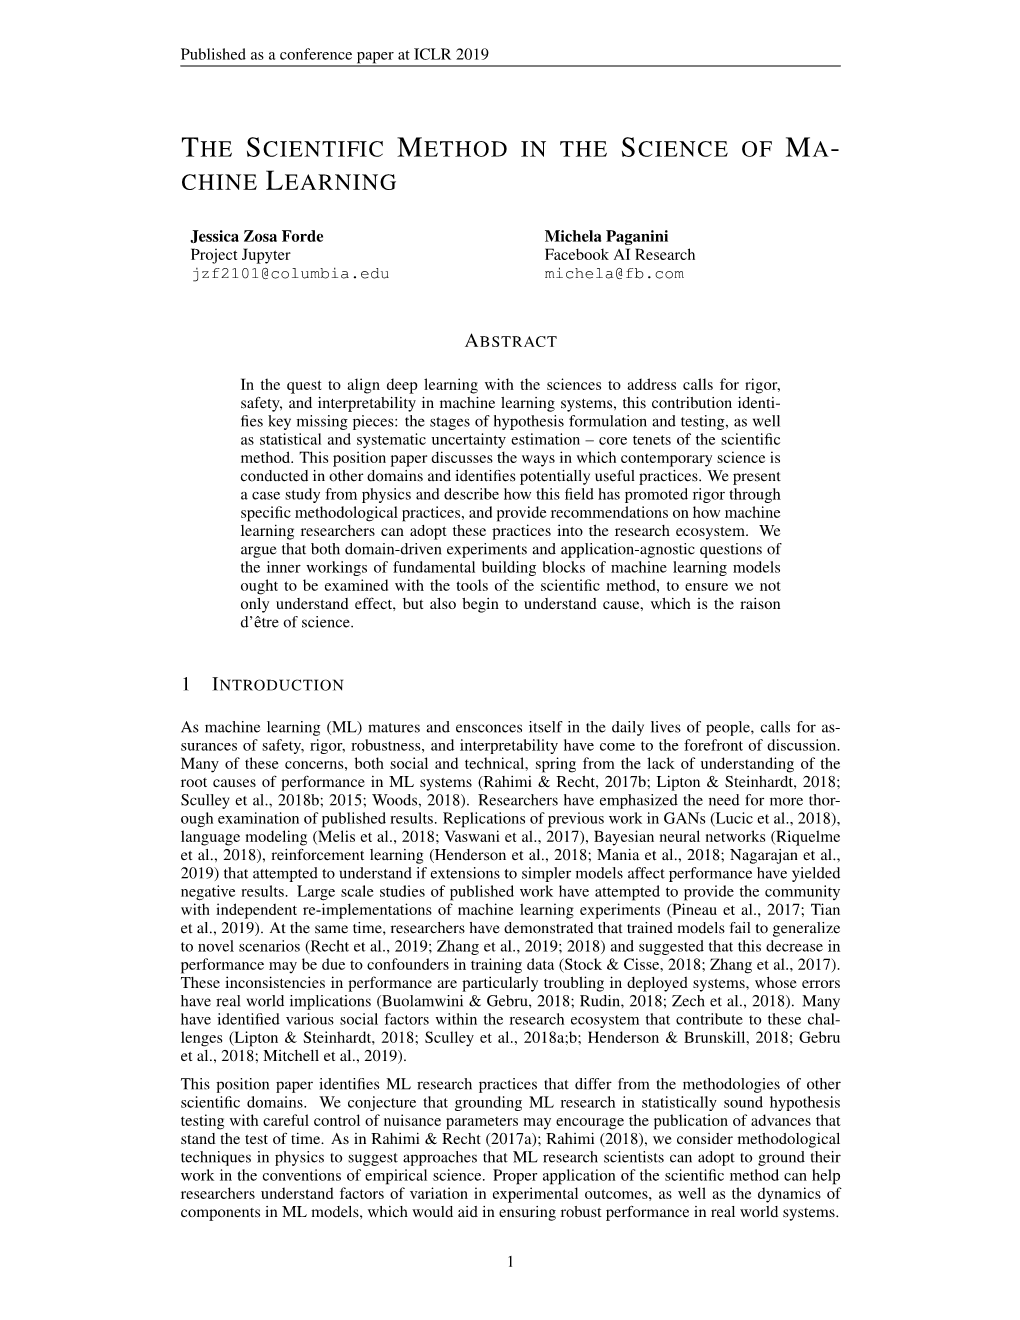 The Scientific Method in the Science of Ma- Chine Learning